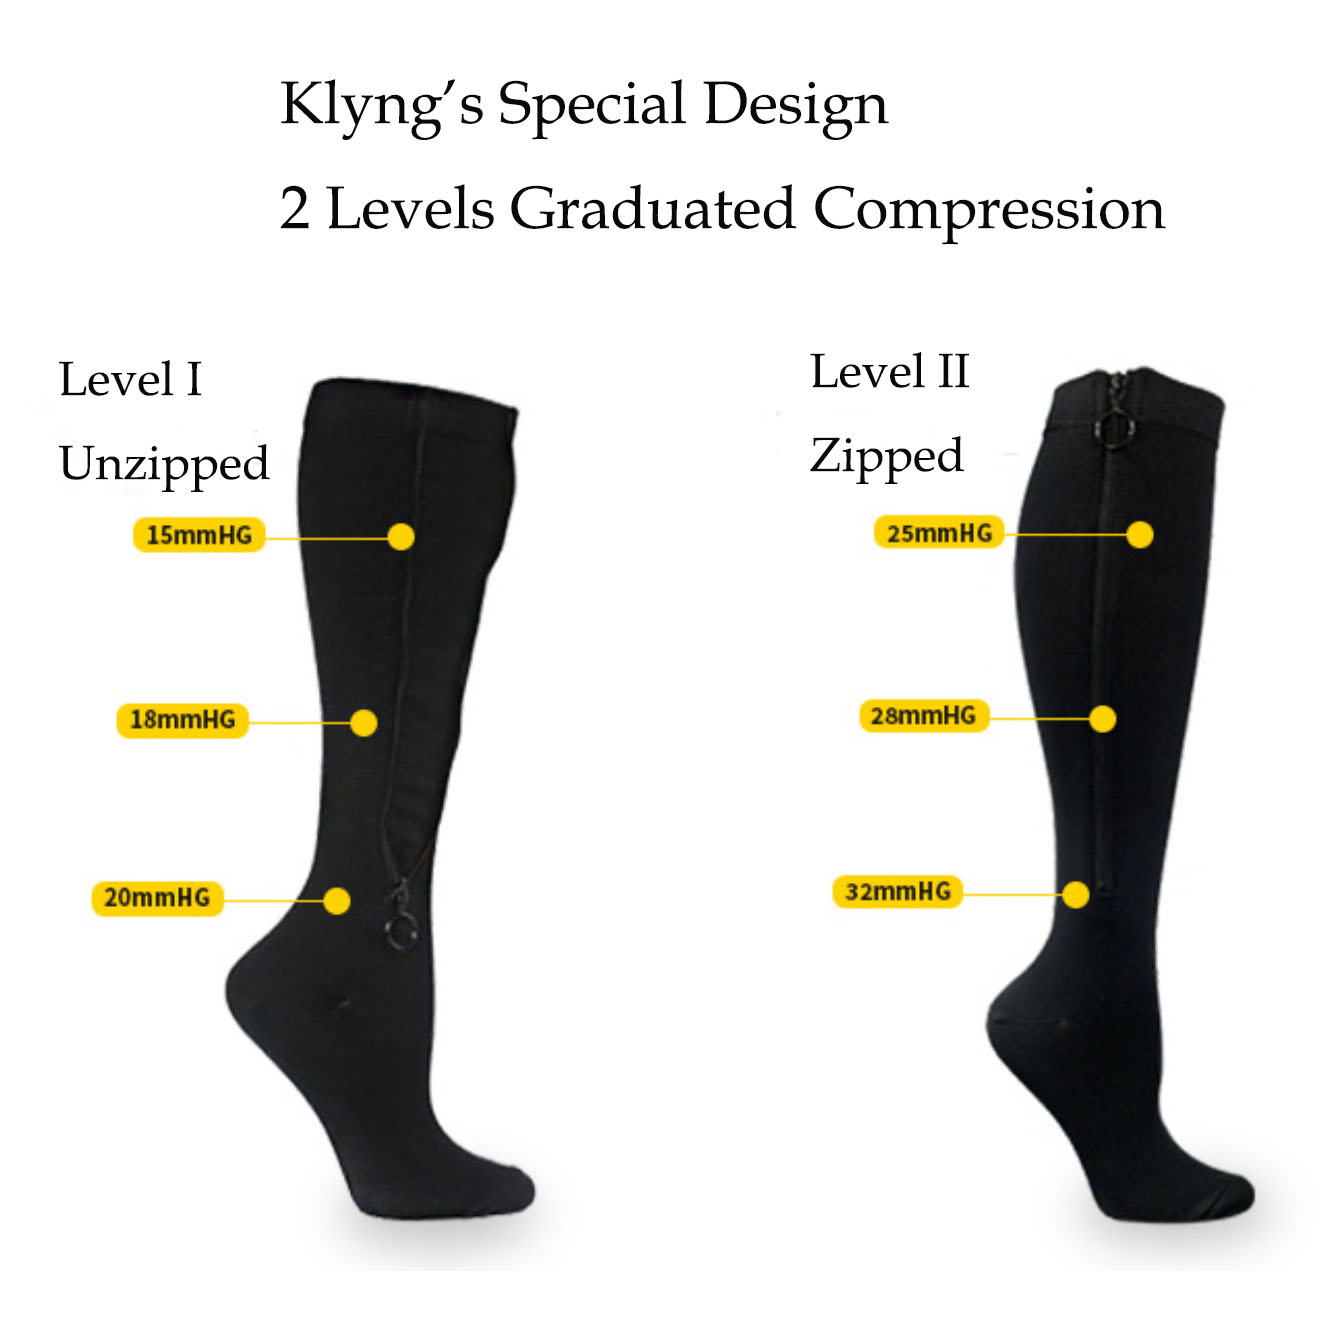 Double Layer Graduated Compression Socks - Klyng